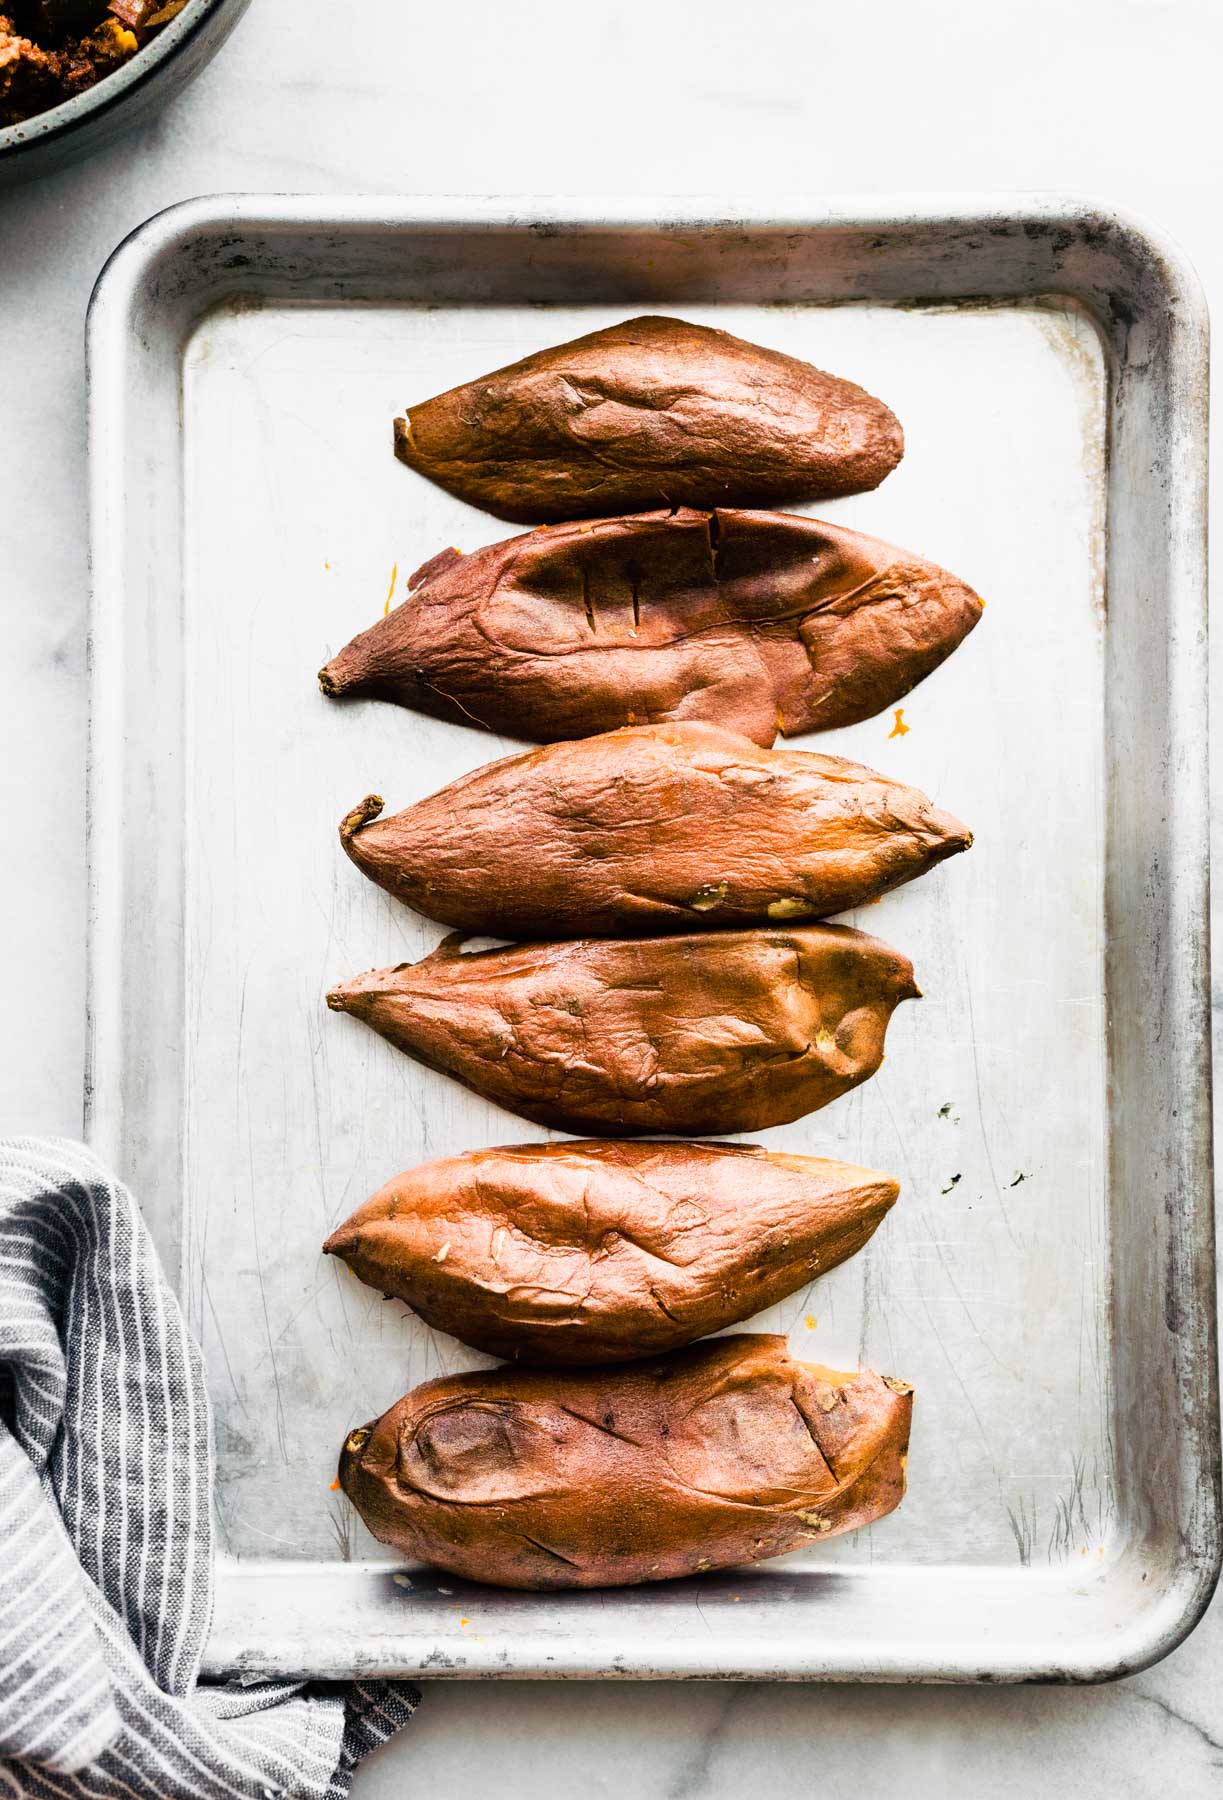 hollowed out sweet potatoes placed upside down on a baking sheet